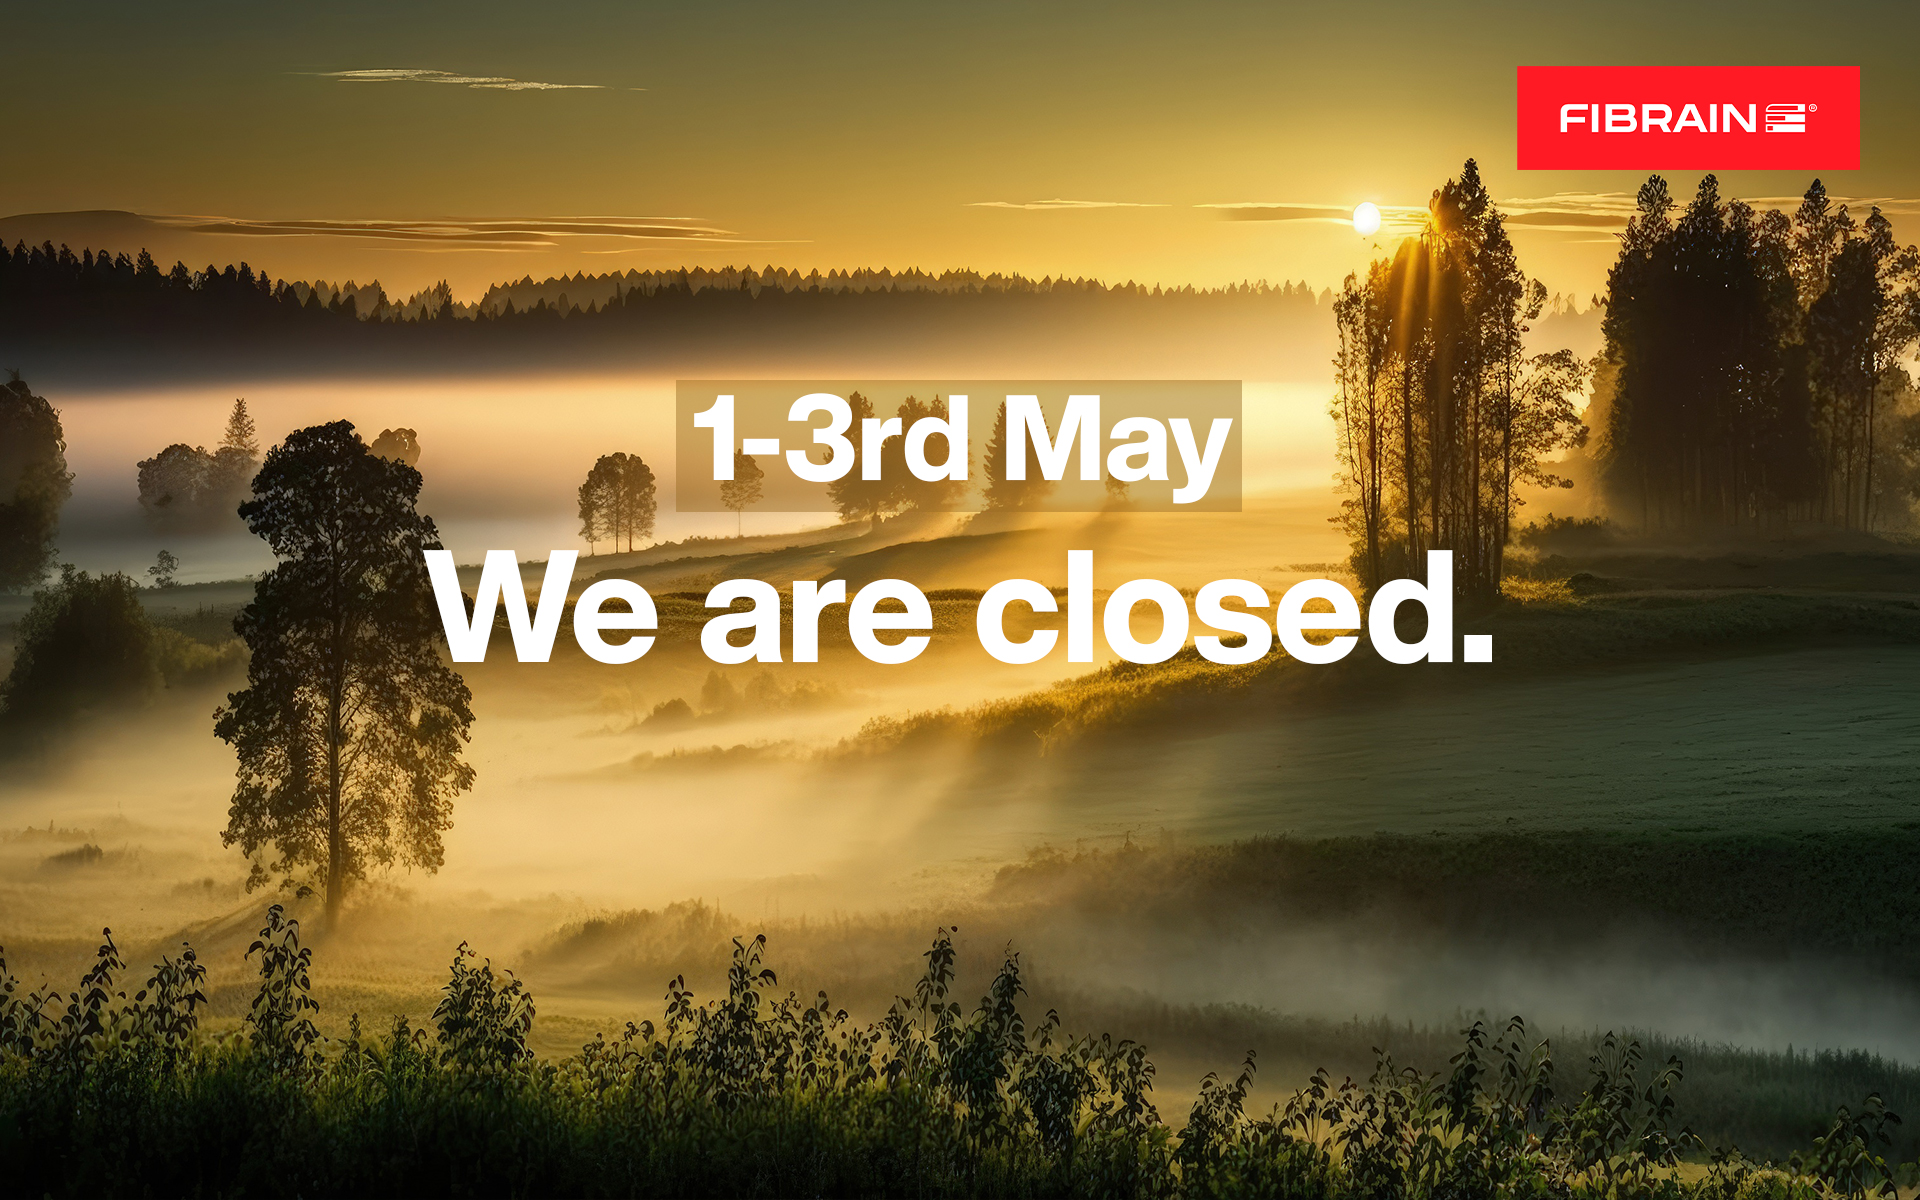 FIBRAIN is closed on 1-3rd May